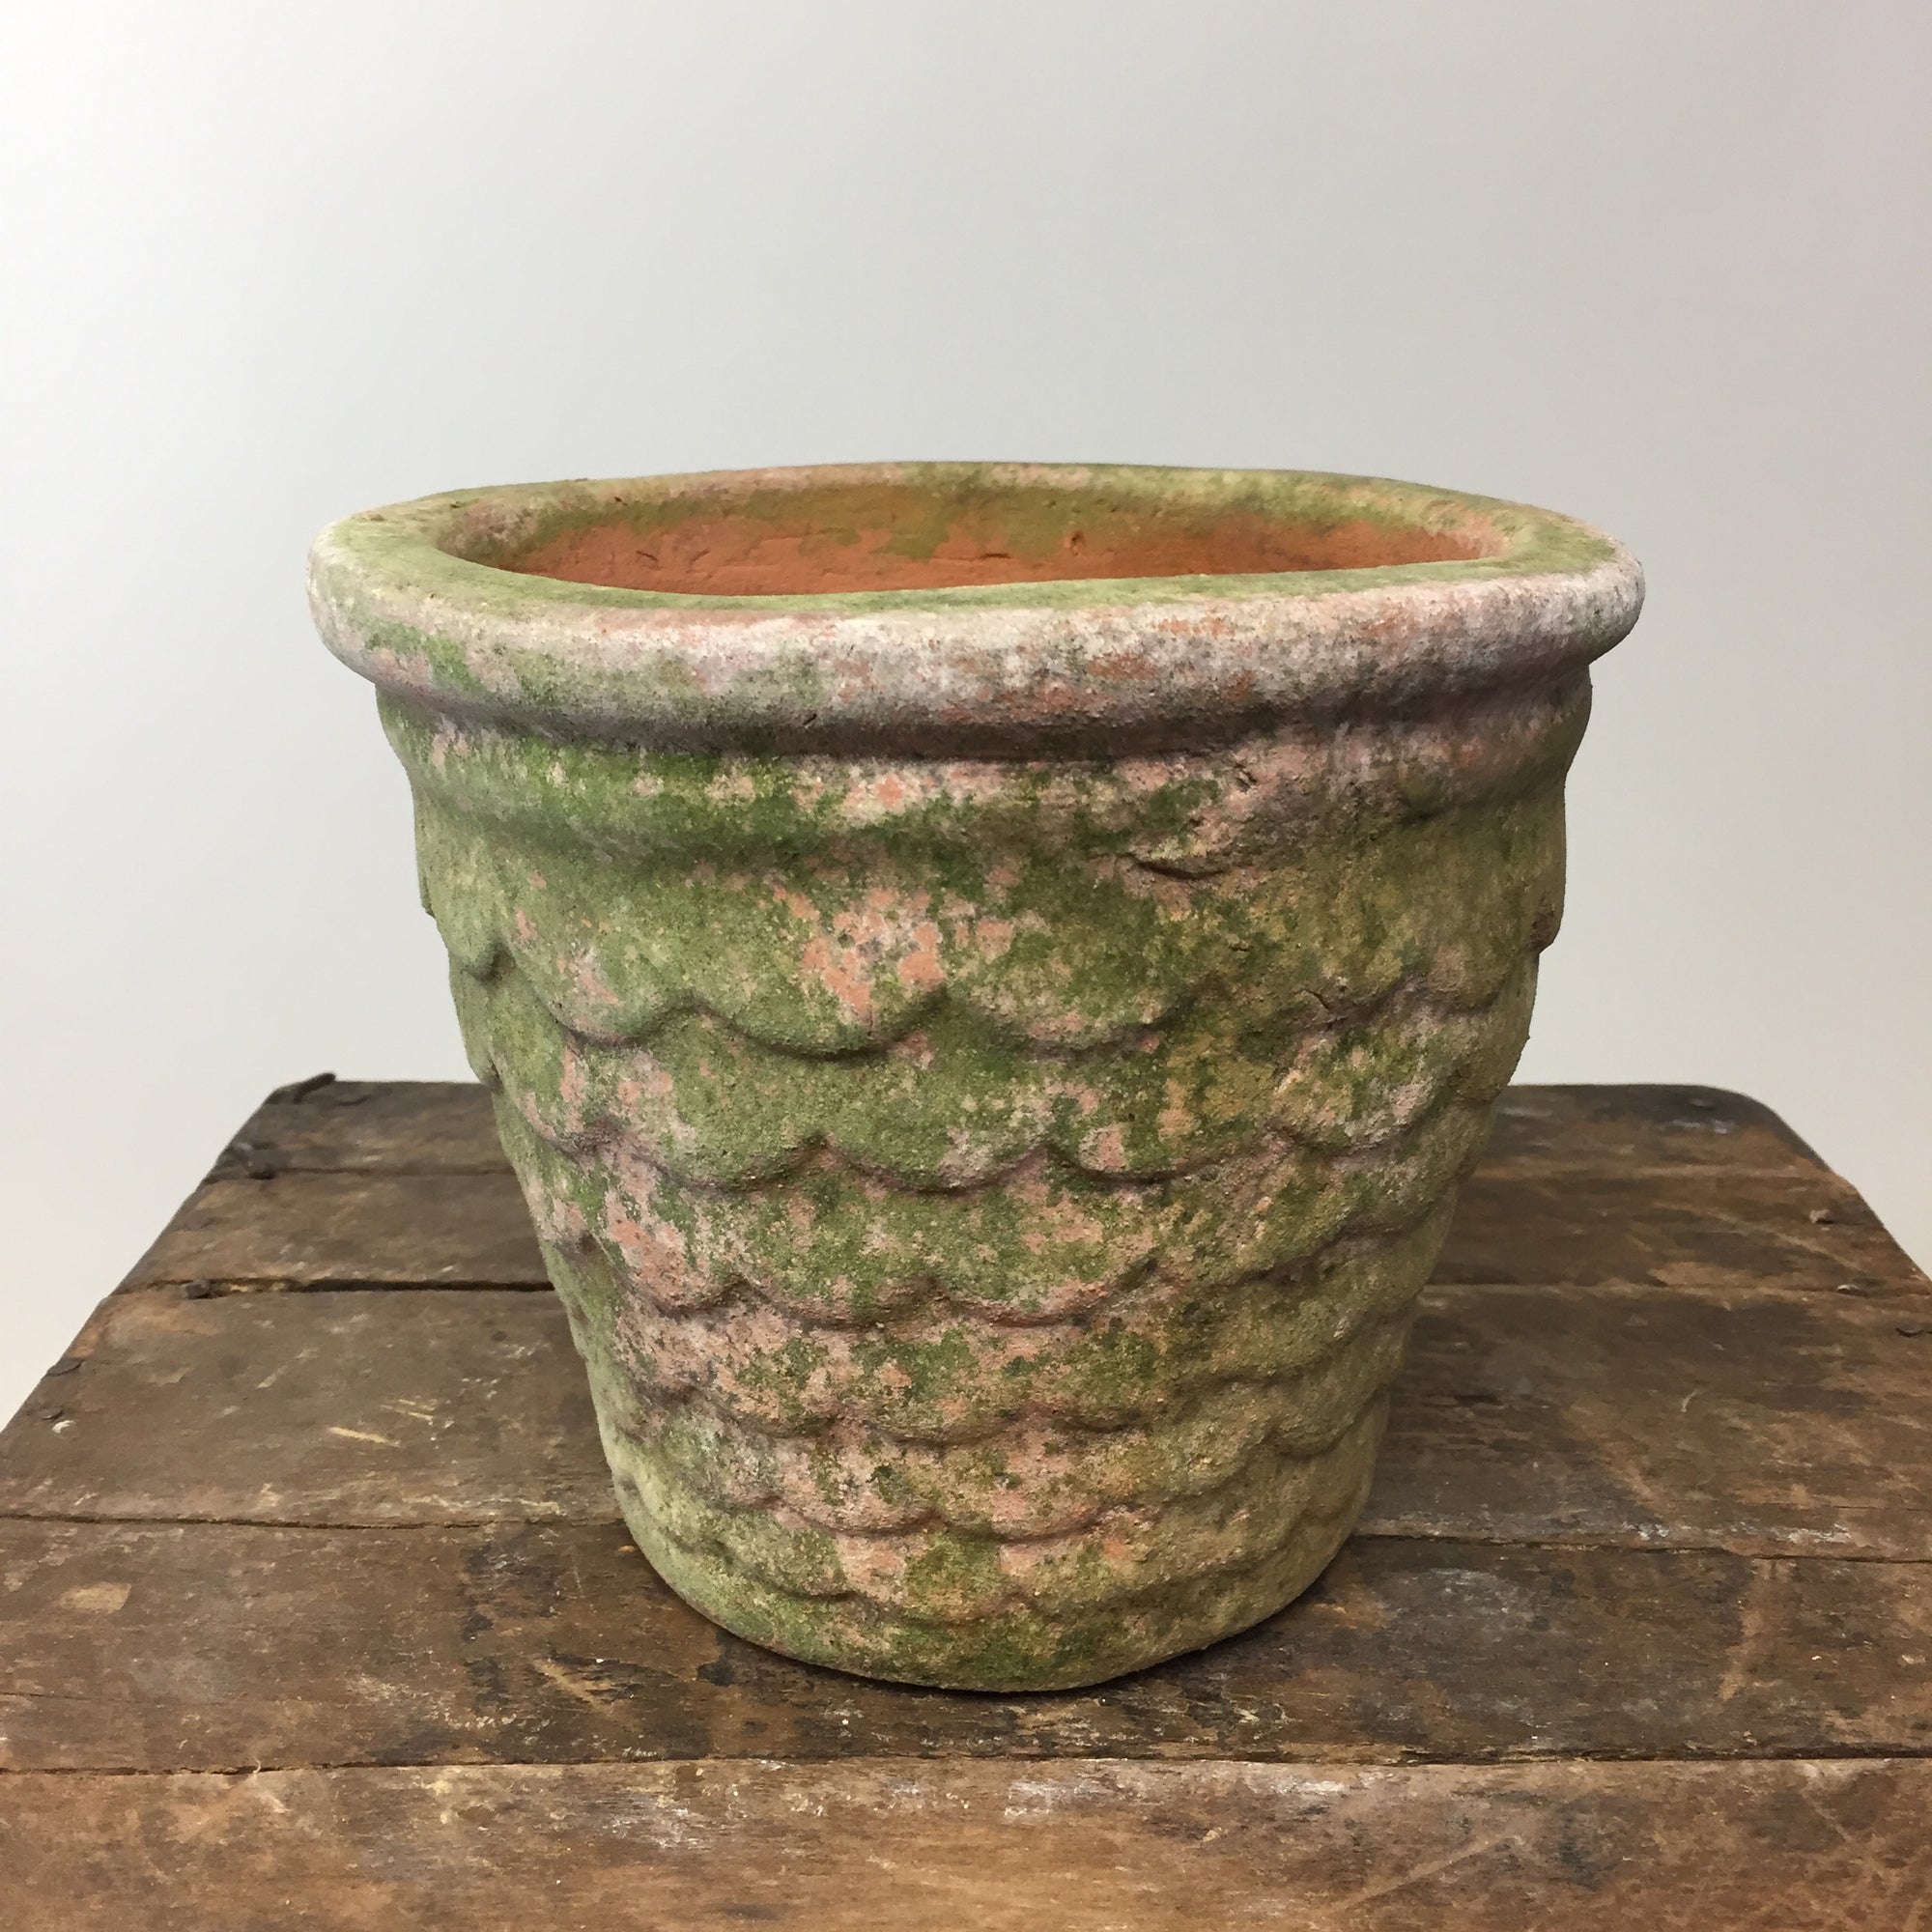 Dragonscale Aged Terracotta Pot Small.